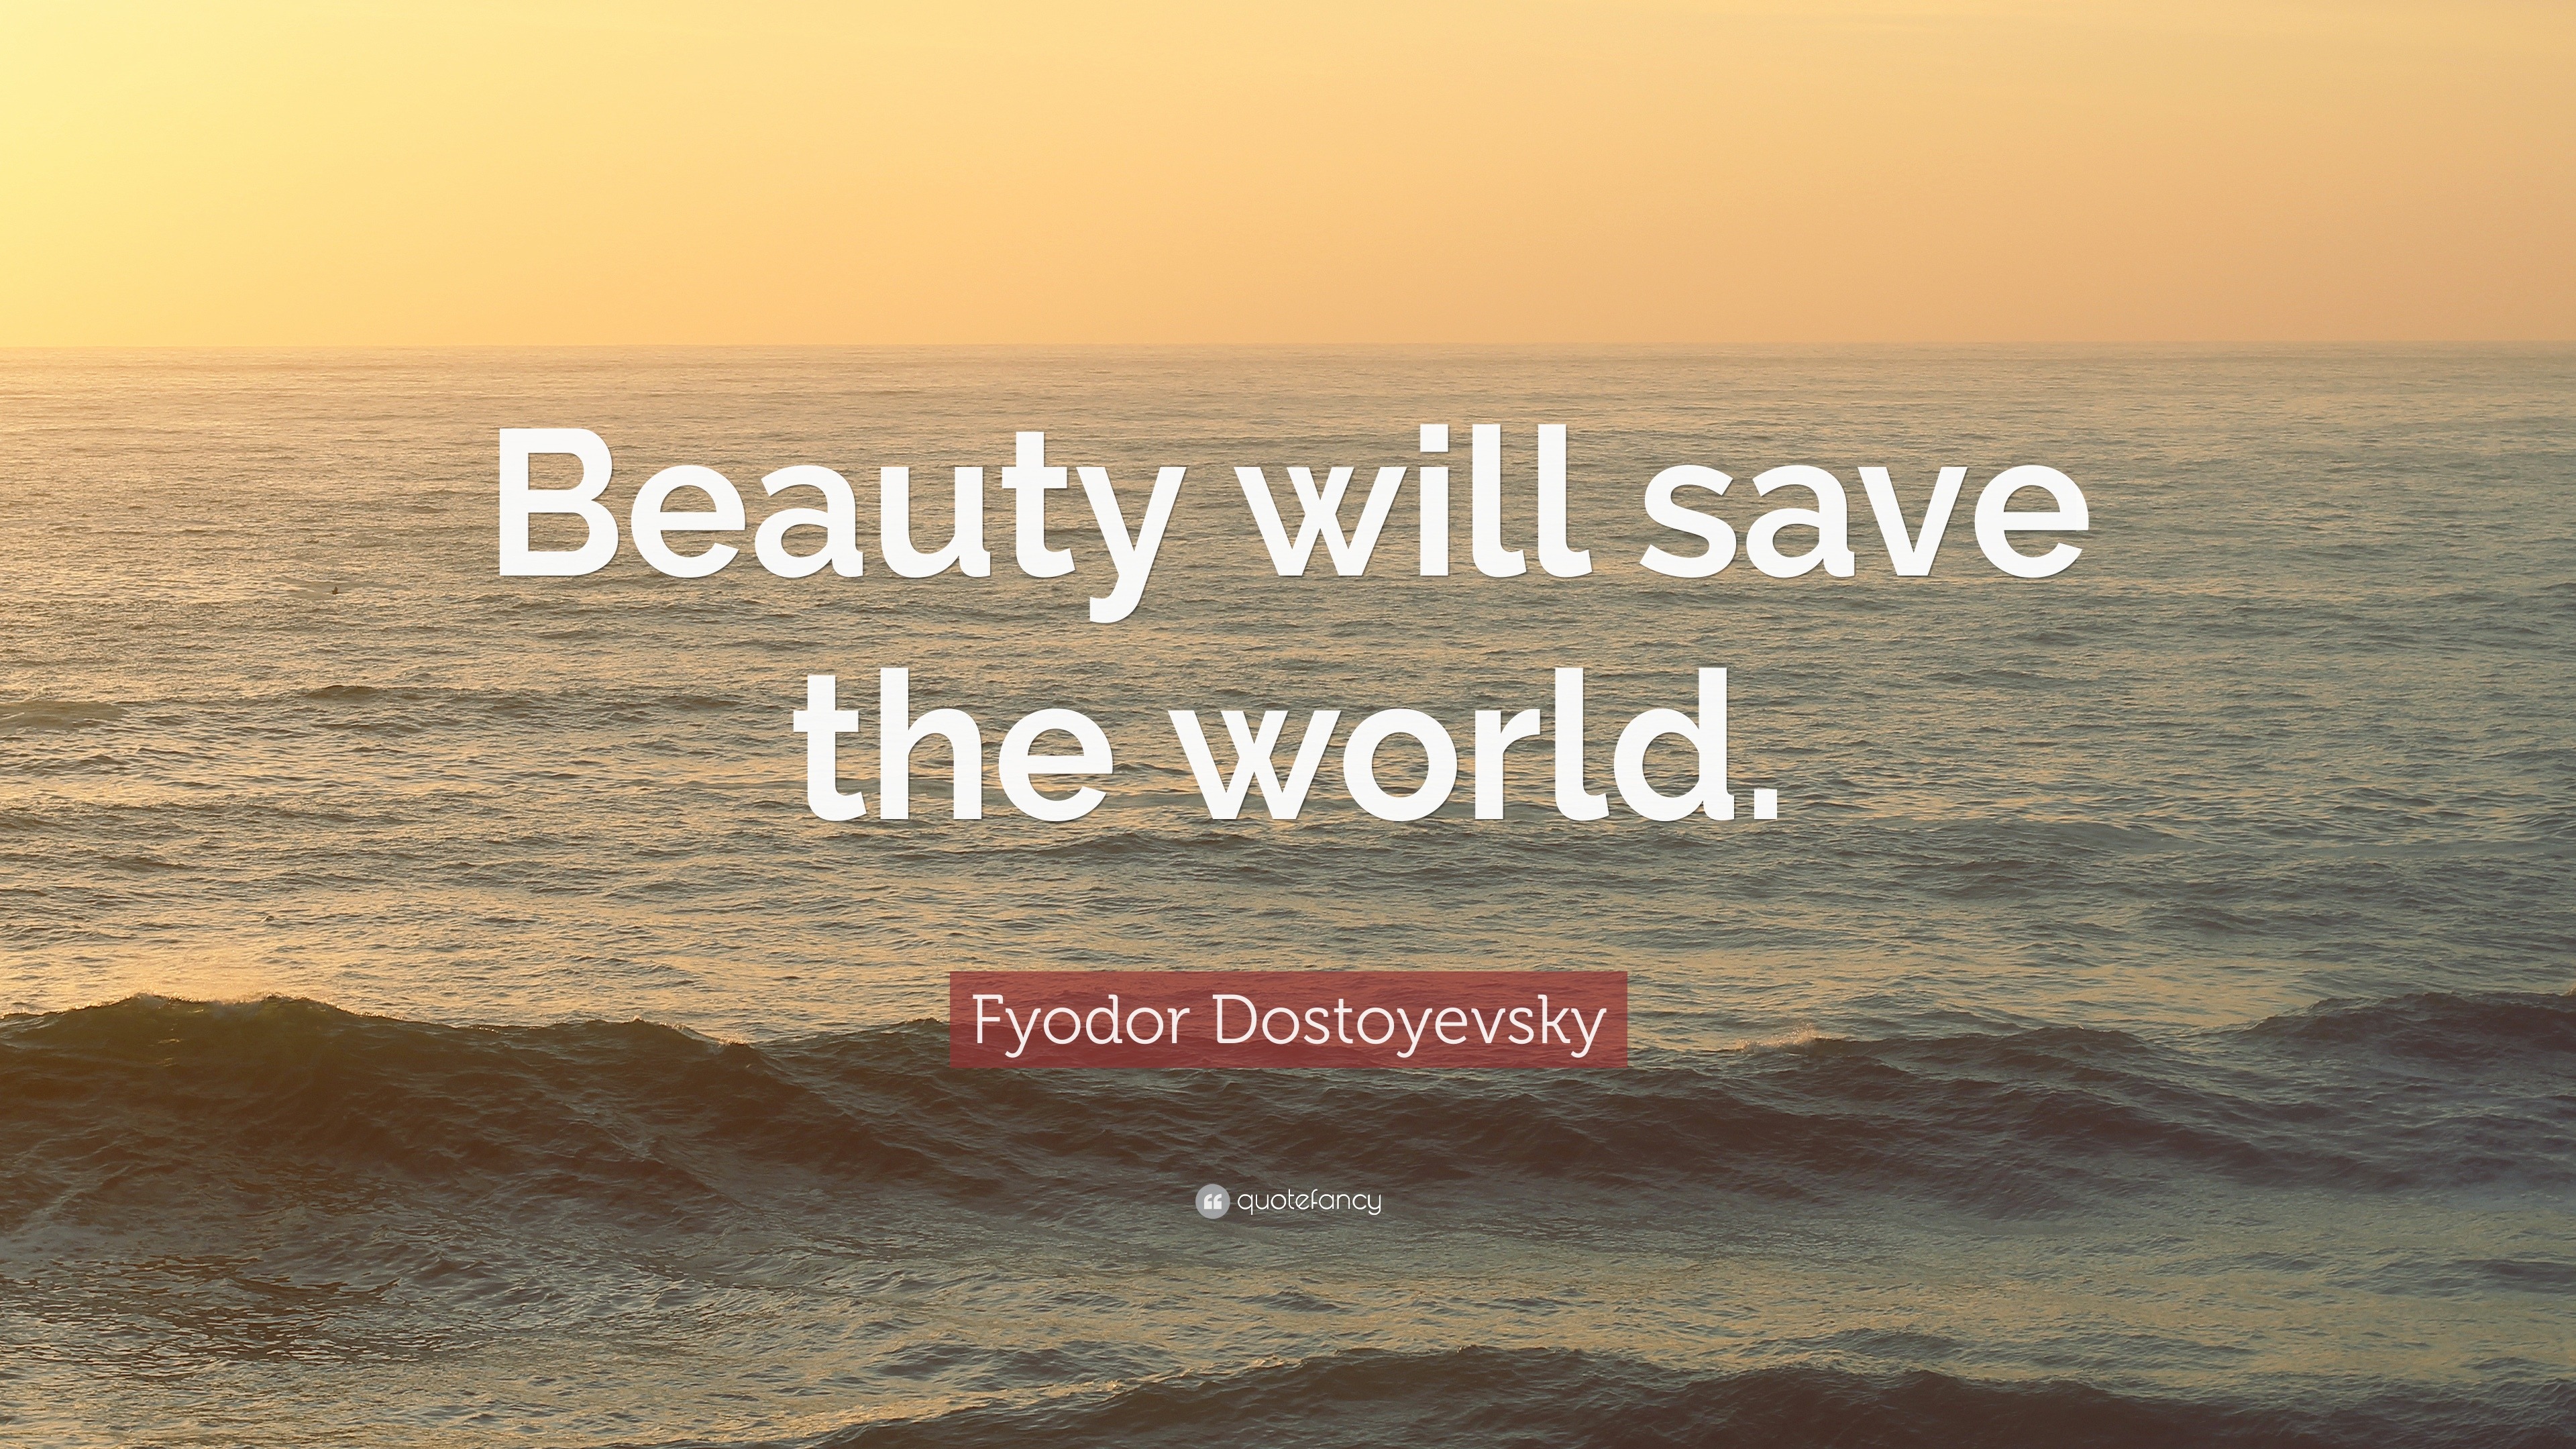 Fyodor Dostoyevsky Quote: “Beauty will save the world.” (12 wallpapers